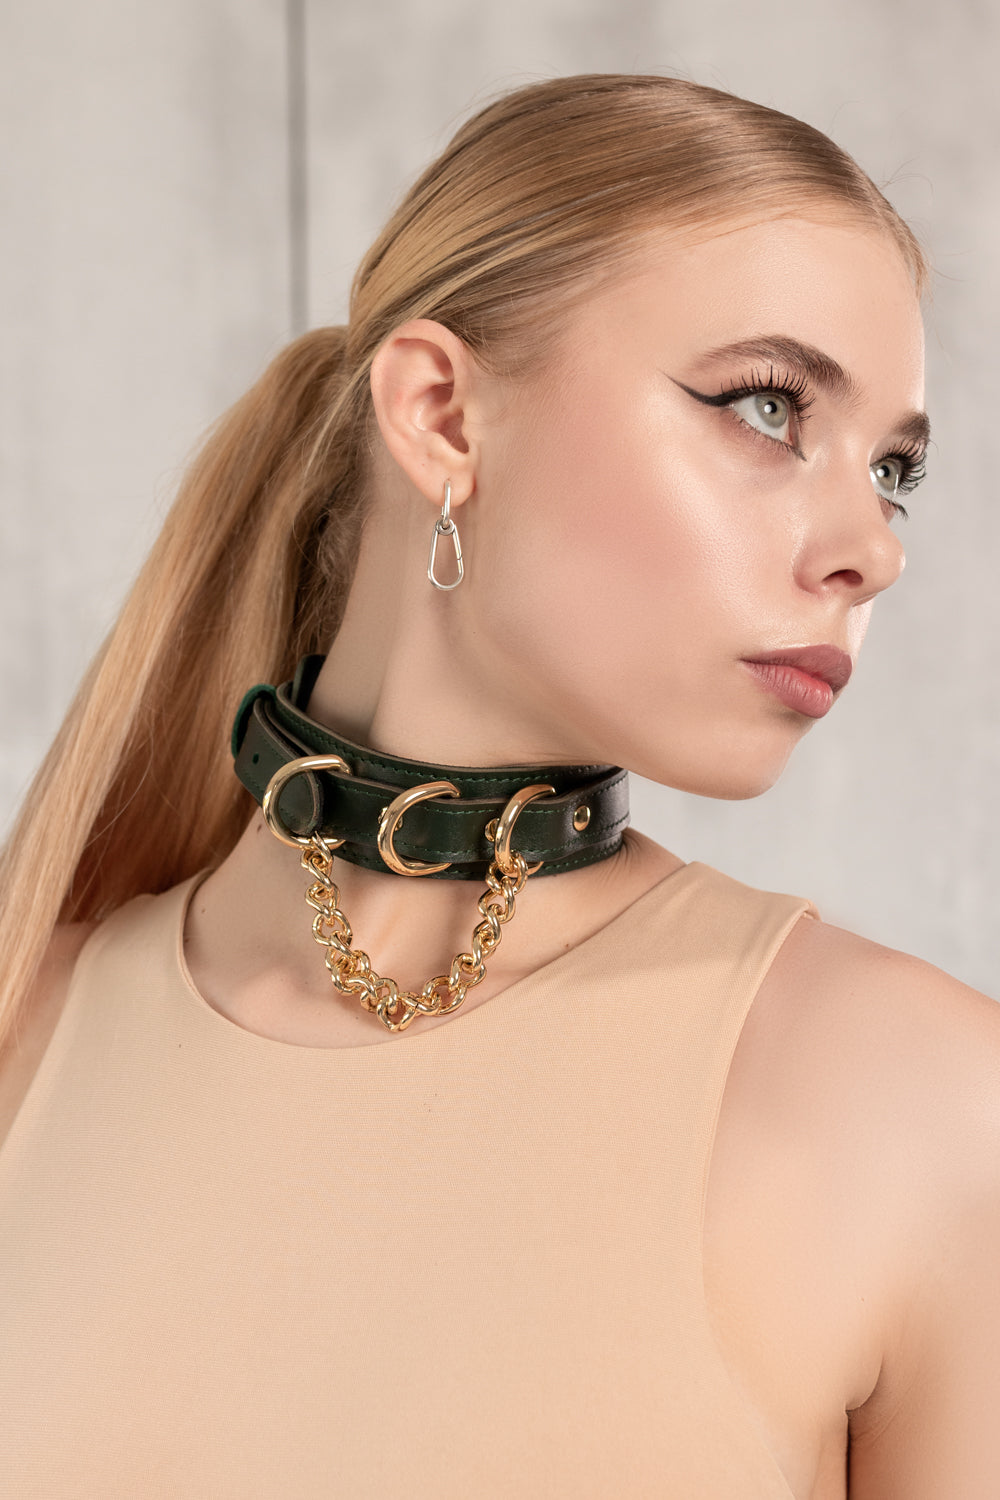 How to Integrate BDSM Accessories into Your Casual Style?